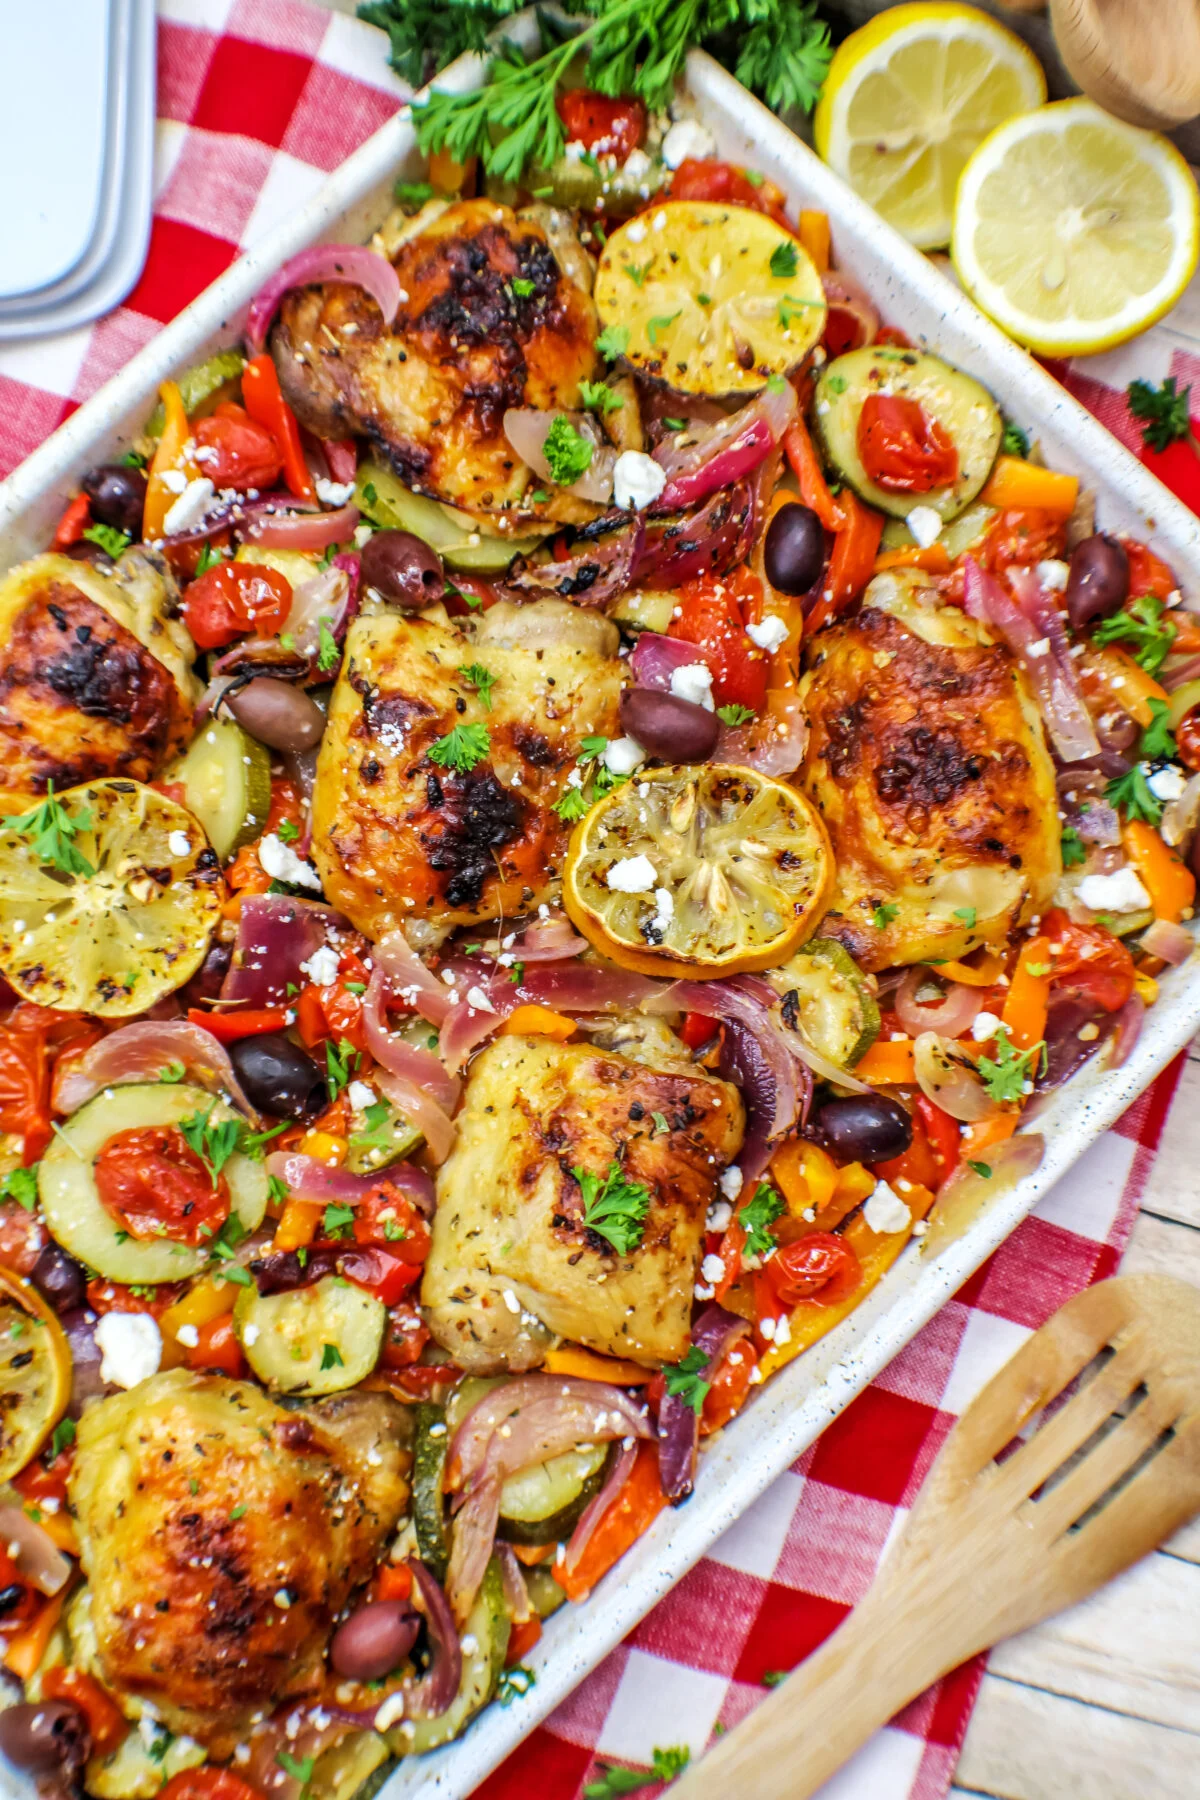 This Greek chicken sheet pan dinner is perfect for busy weeknights! Featuring Greek-inspired flavours, it's an easy family-friendly meal.